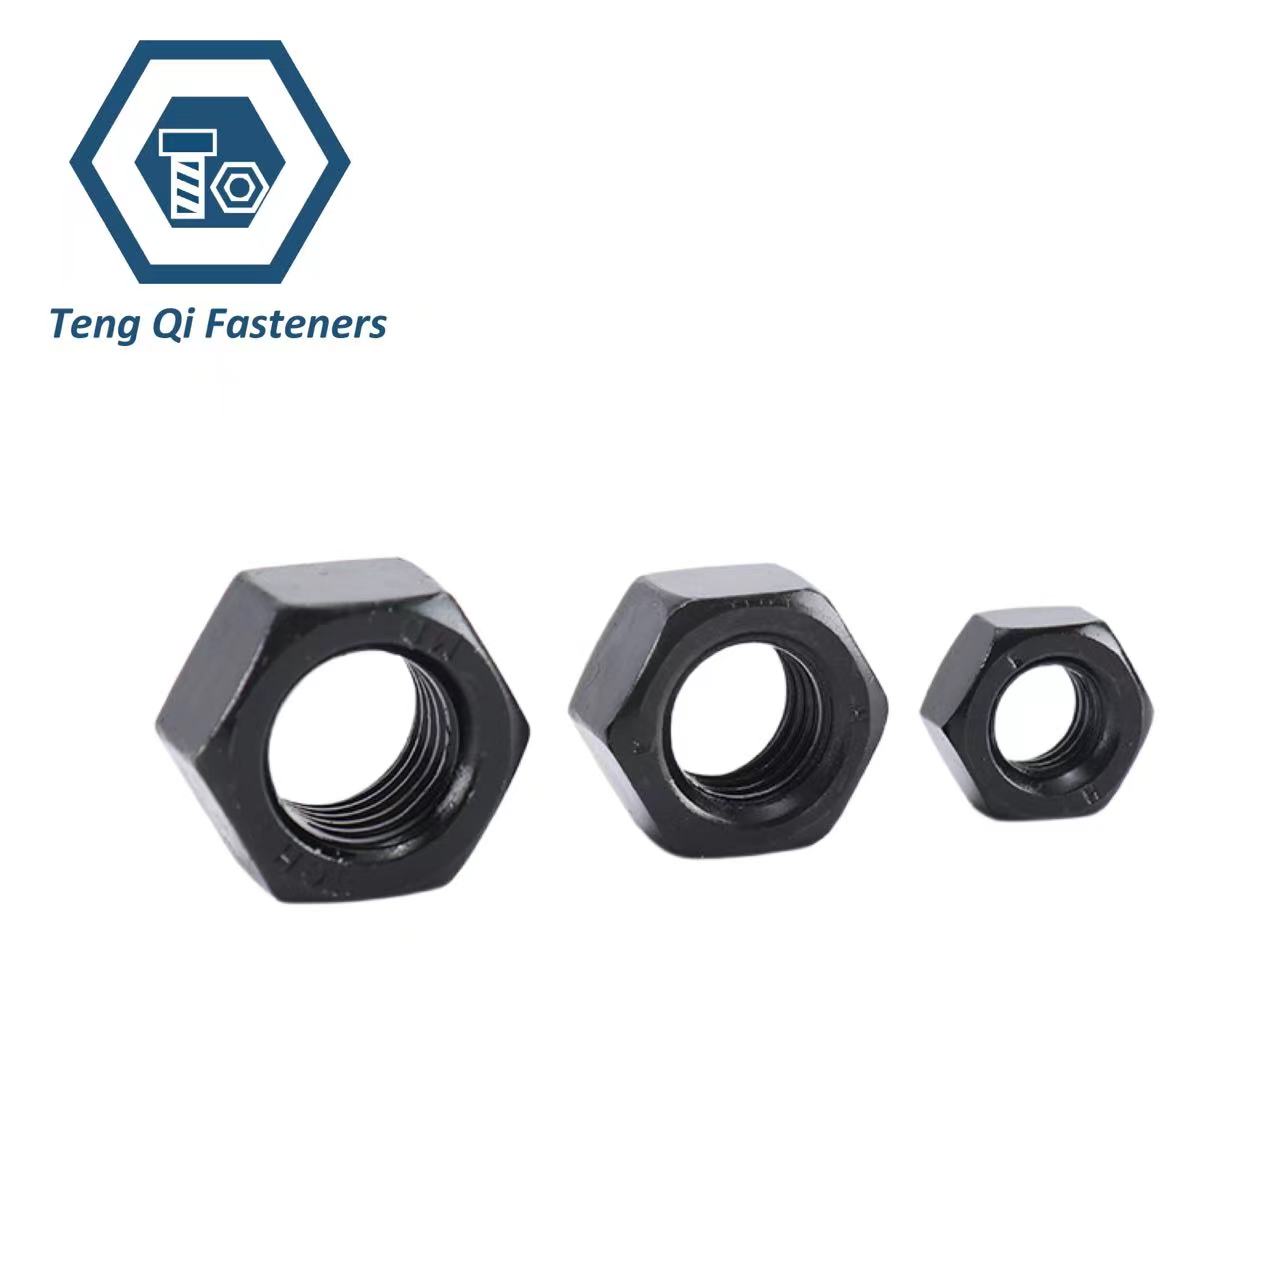 Italian Standard UNI5713 Black Oxidation High-Strength Large Hexagon Nuts For Structural Bolting